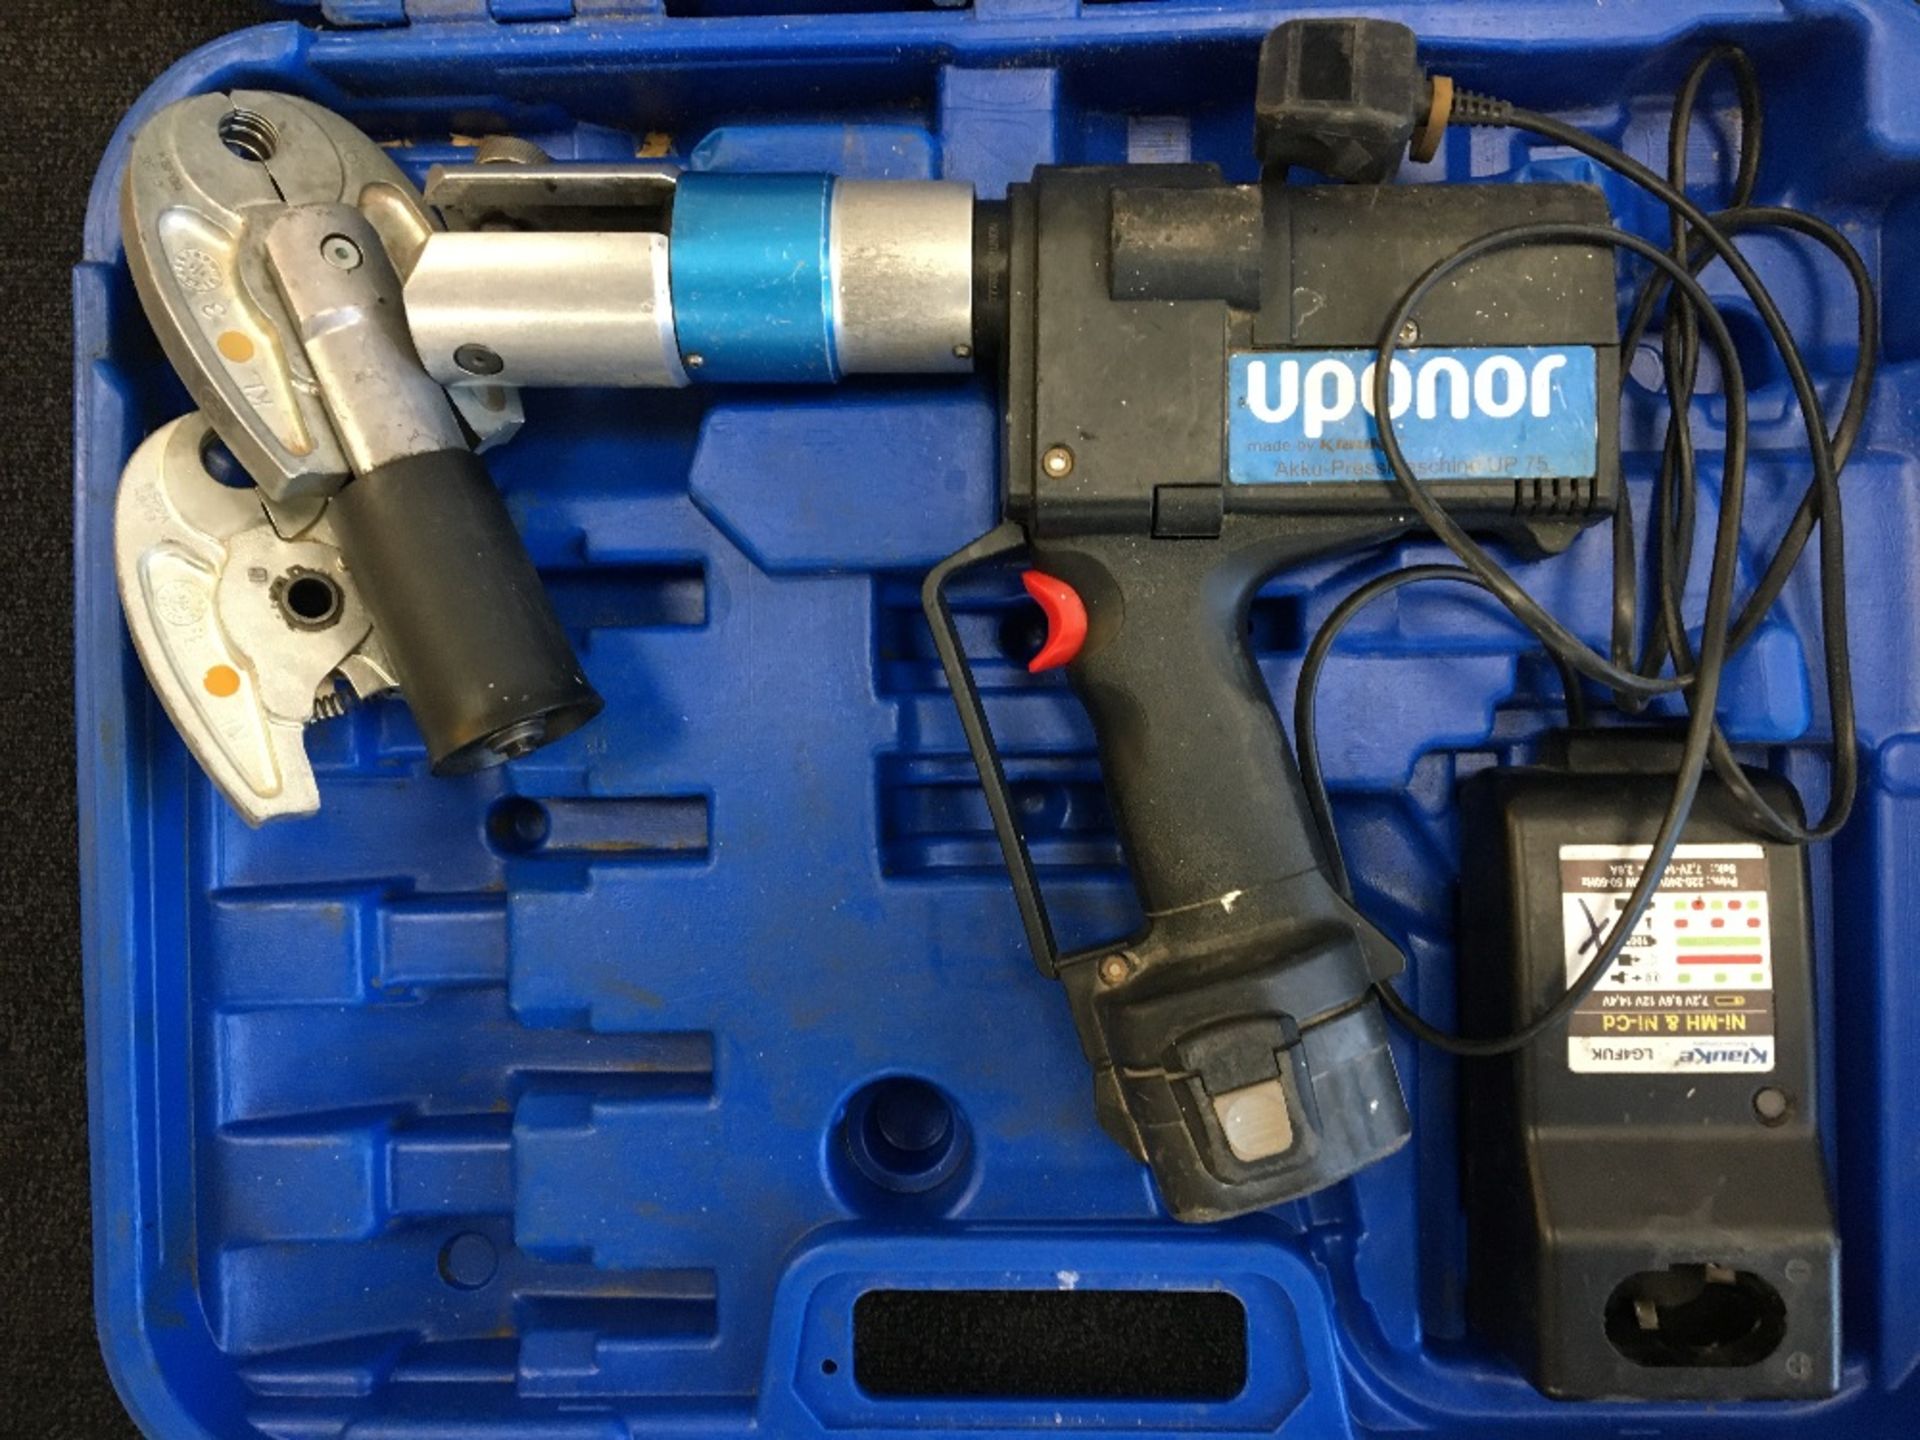 Uponor Akku-pressmachine UP75 Pressgun with battery & charger - Image 4 of 5